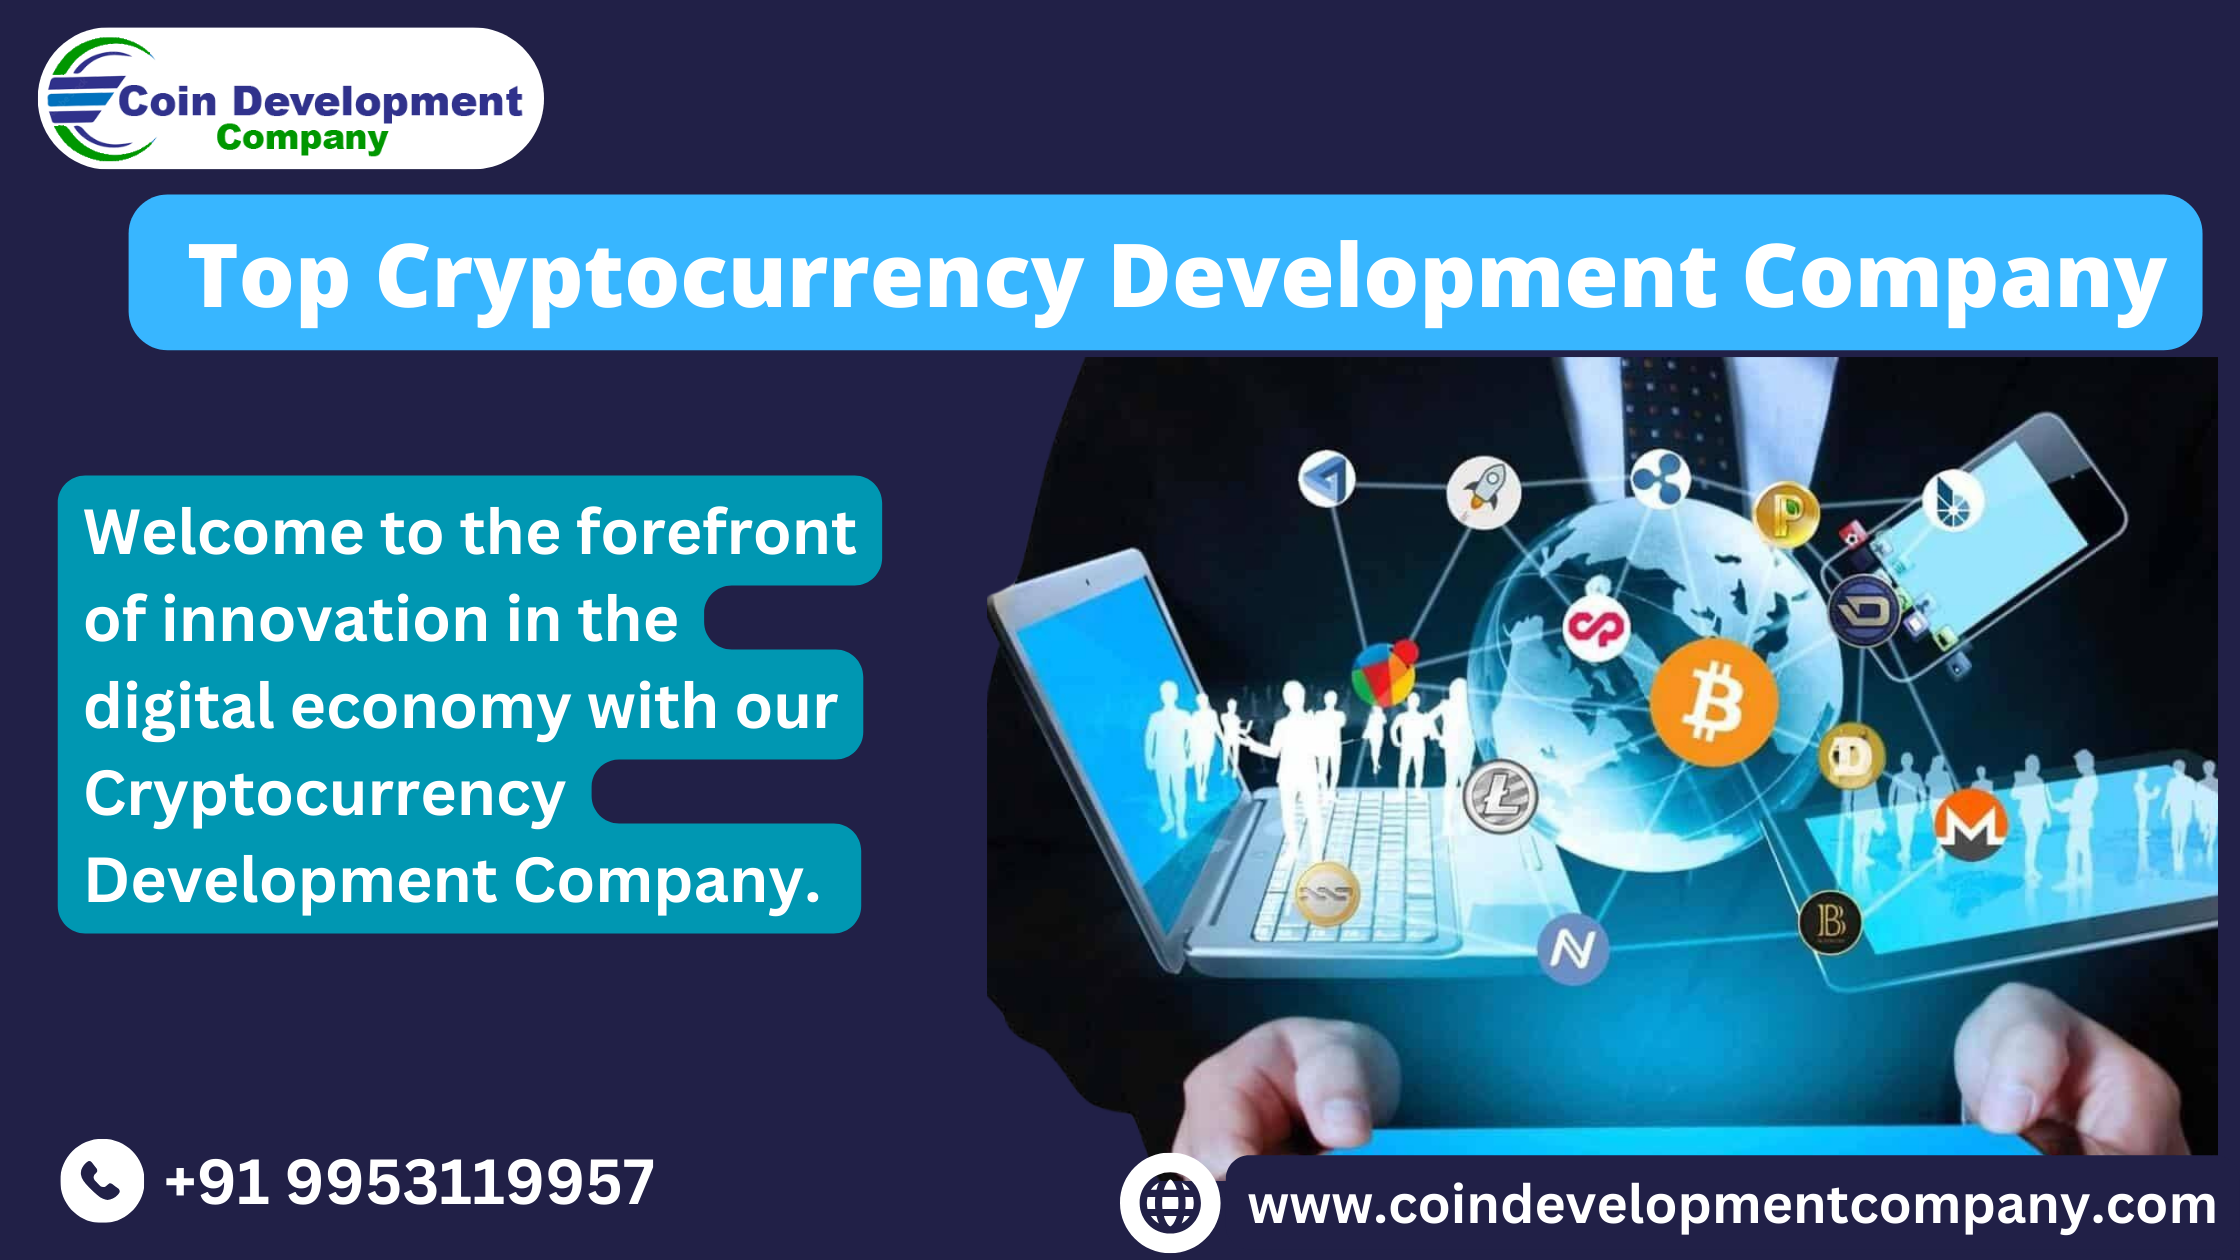 Establishing the Future: Your Top Cryptocurrency Development Company